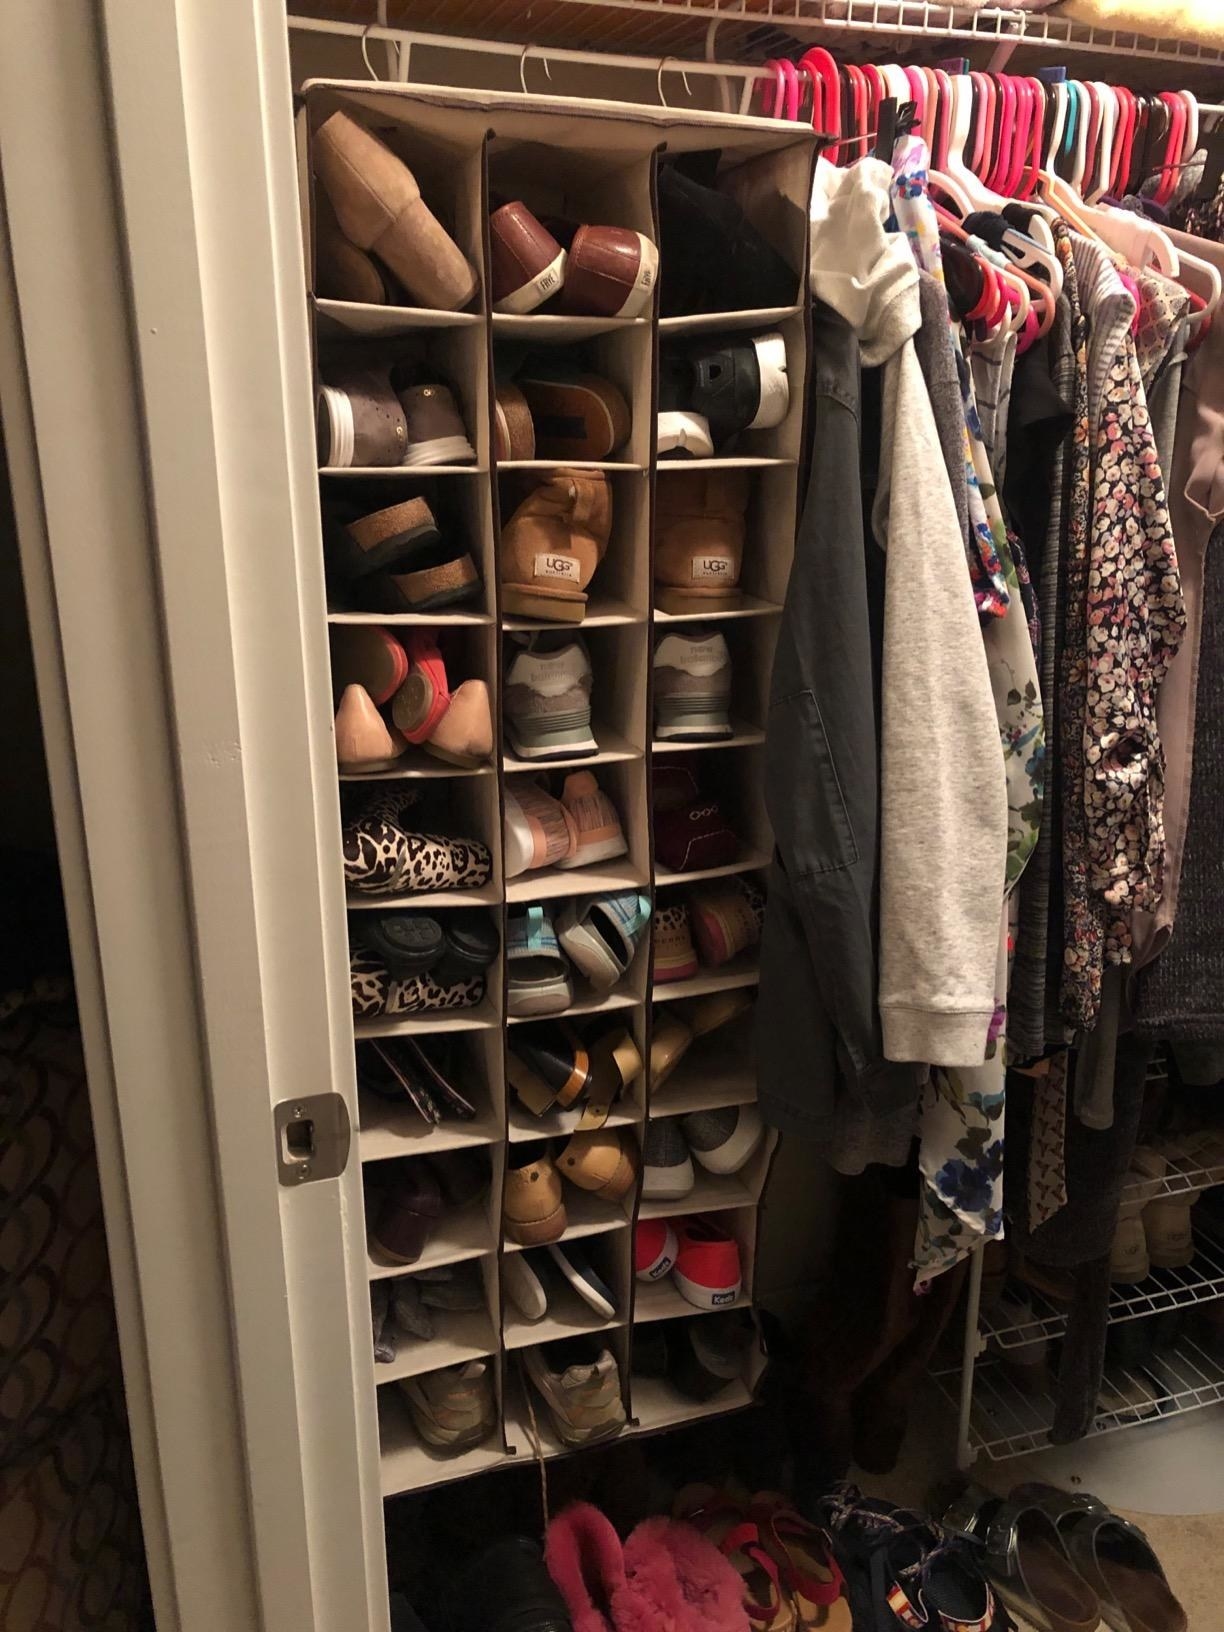 Review image of the 30-slot organizer holding shoes in their closet